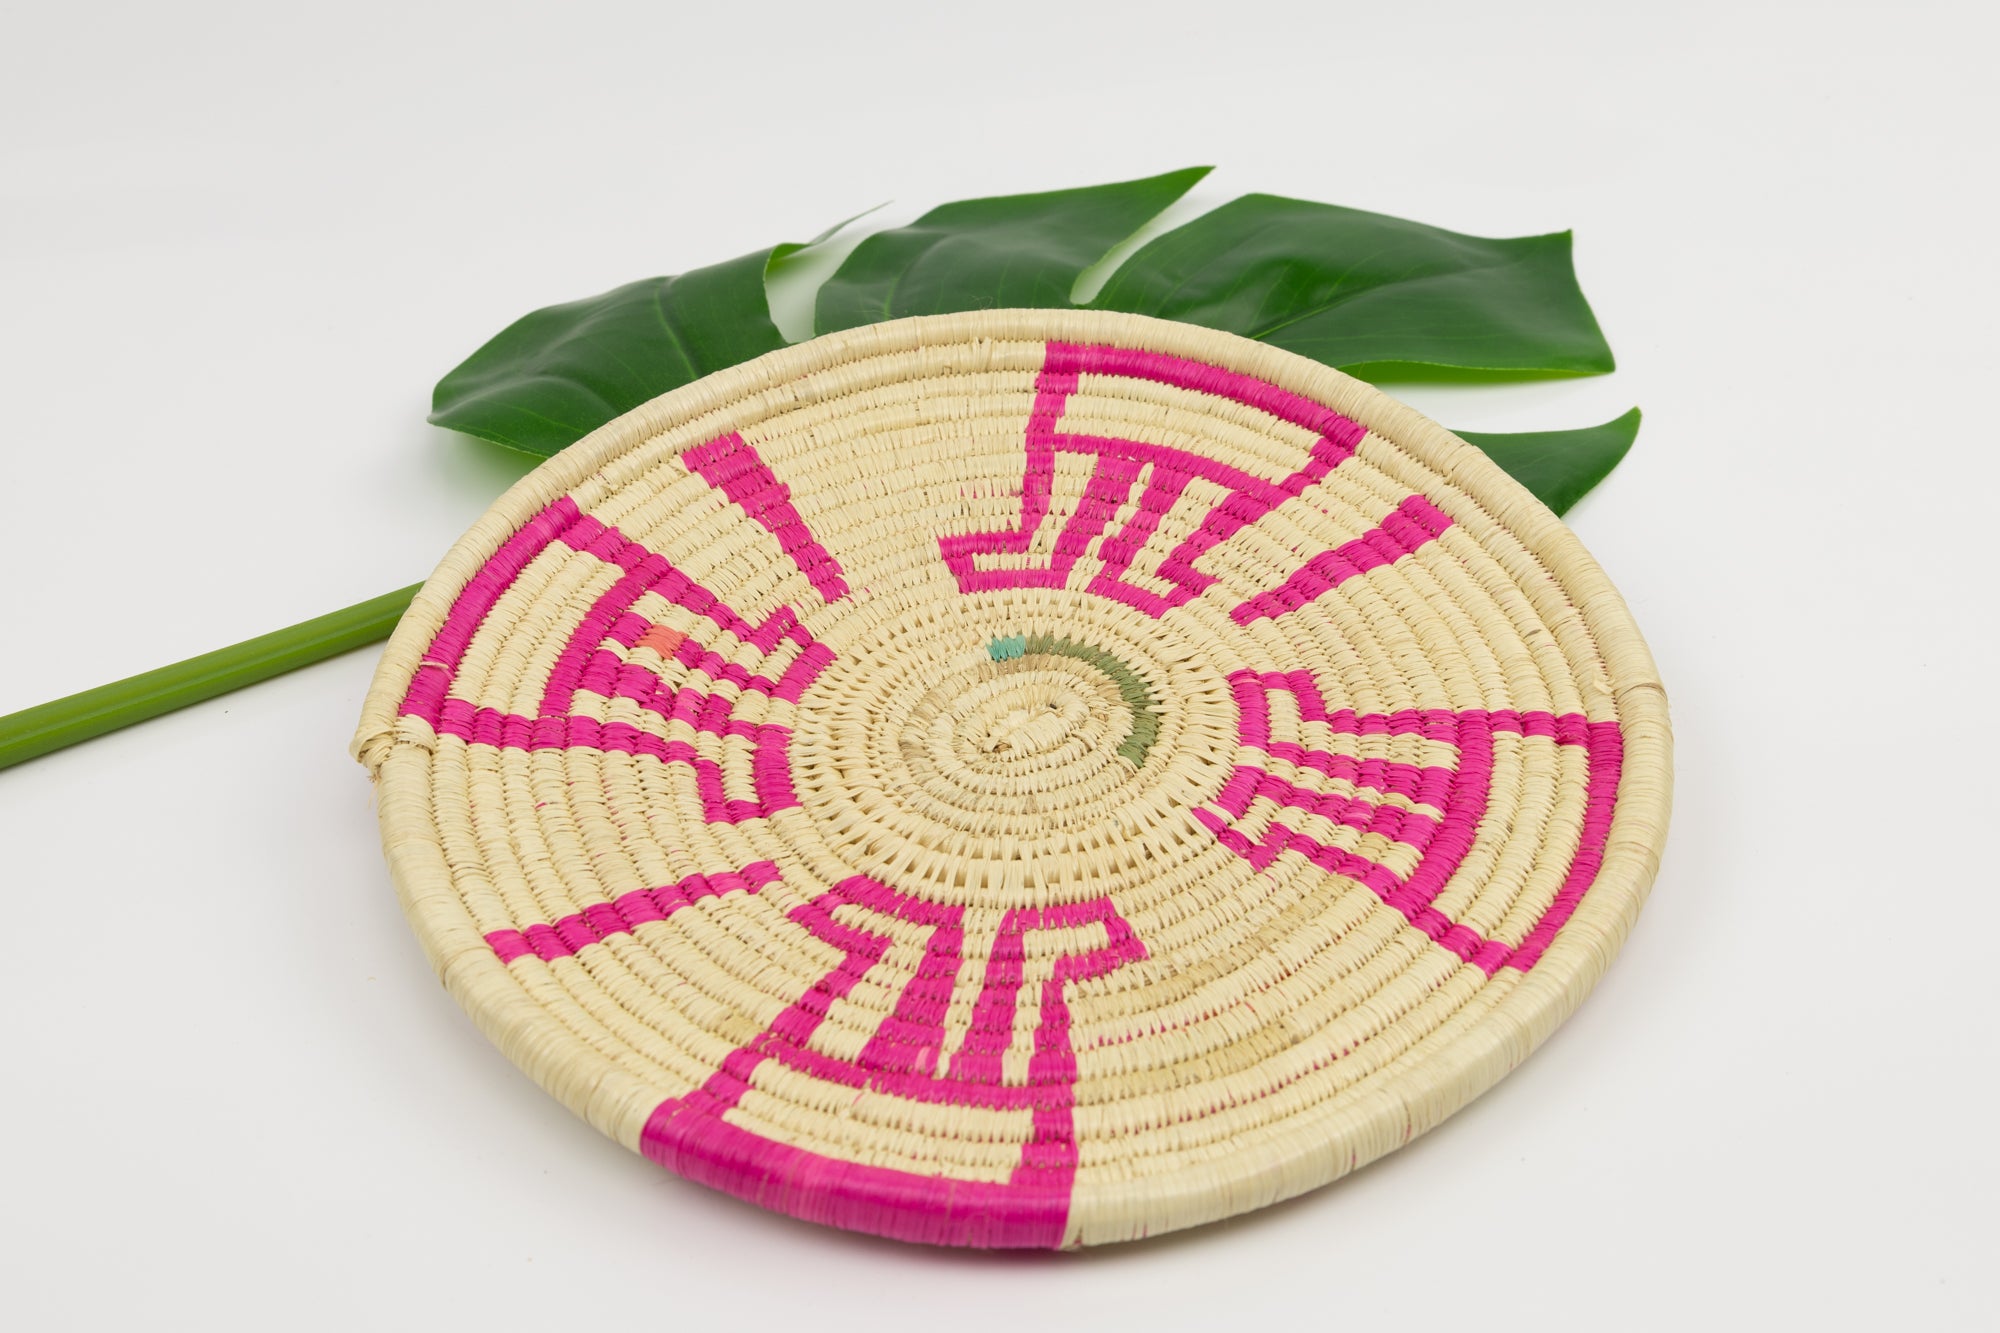 Hand woven plate basket from Panama. Pink and white colors. Wall decoration. Indigenous artists Panama.